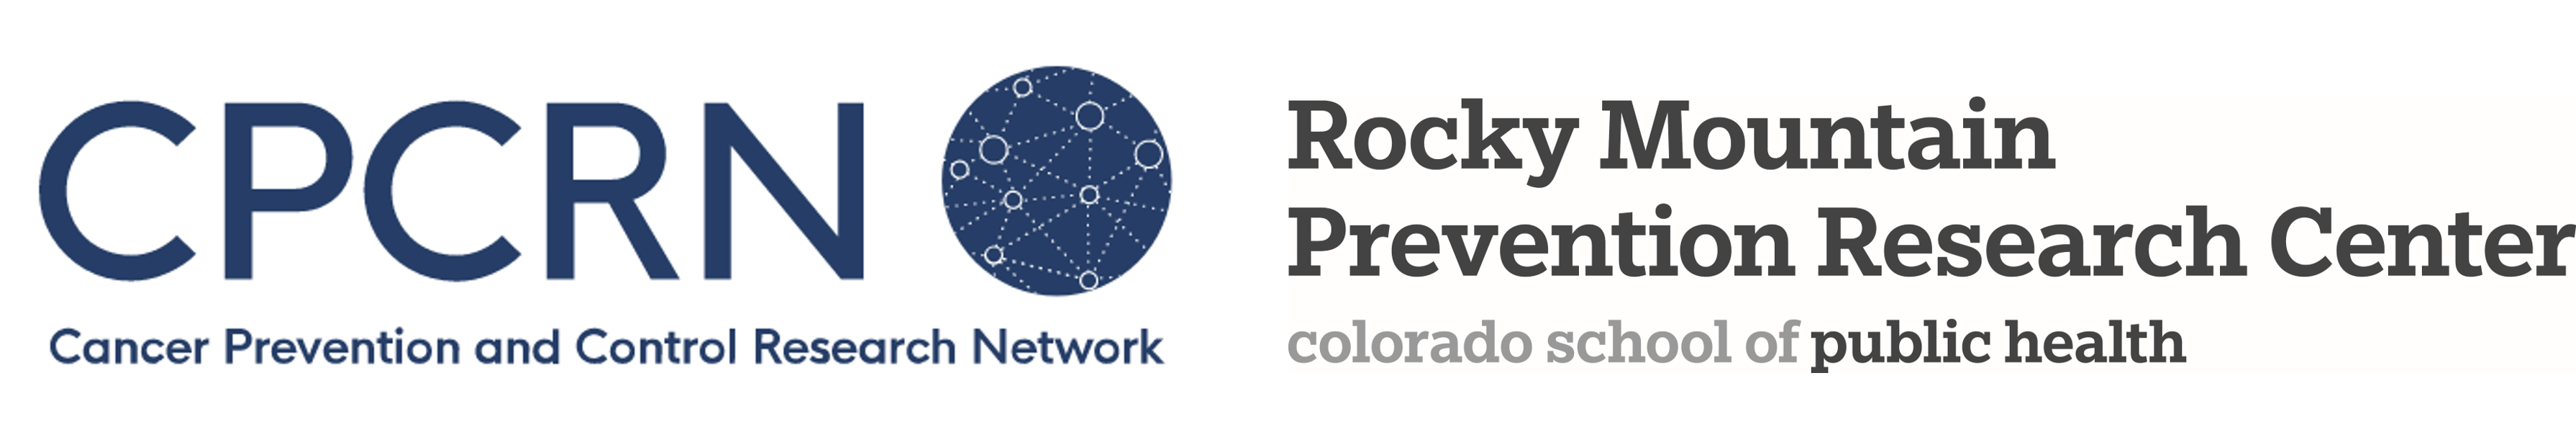 Cancer Prevention and Control Research Network. Rocky Mountain Prevention Research Center. Colorado School of Public Health.